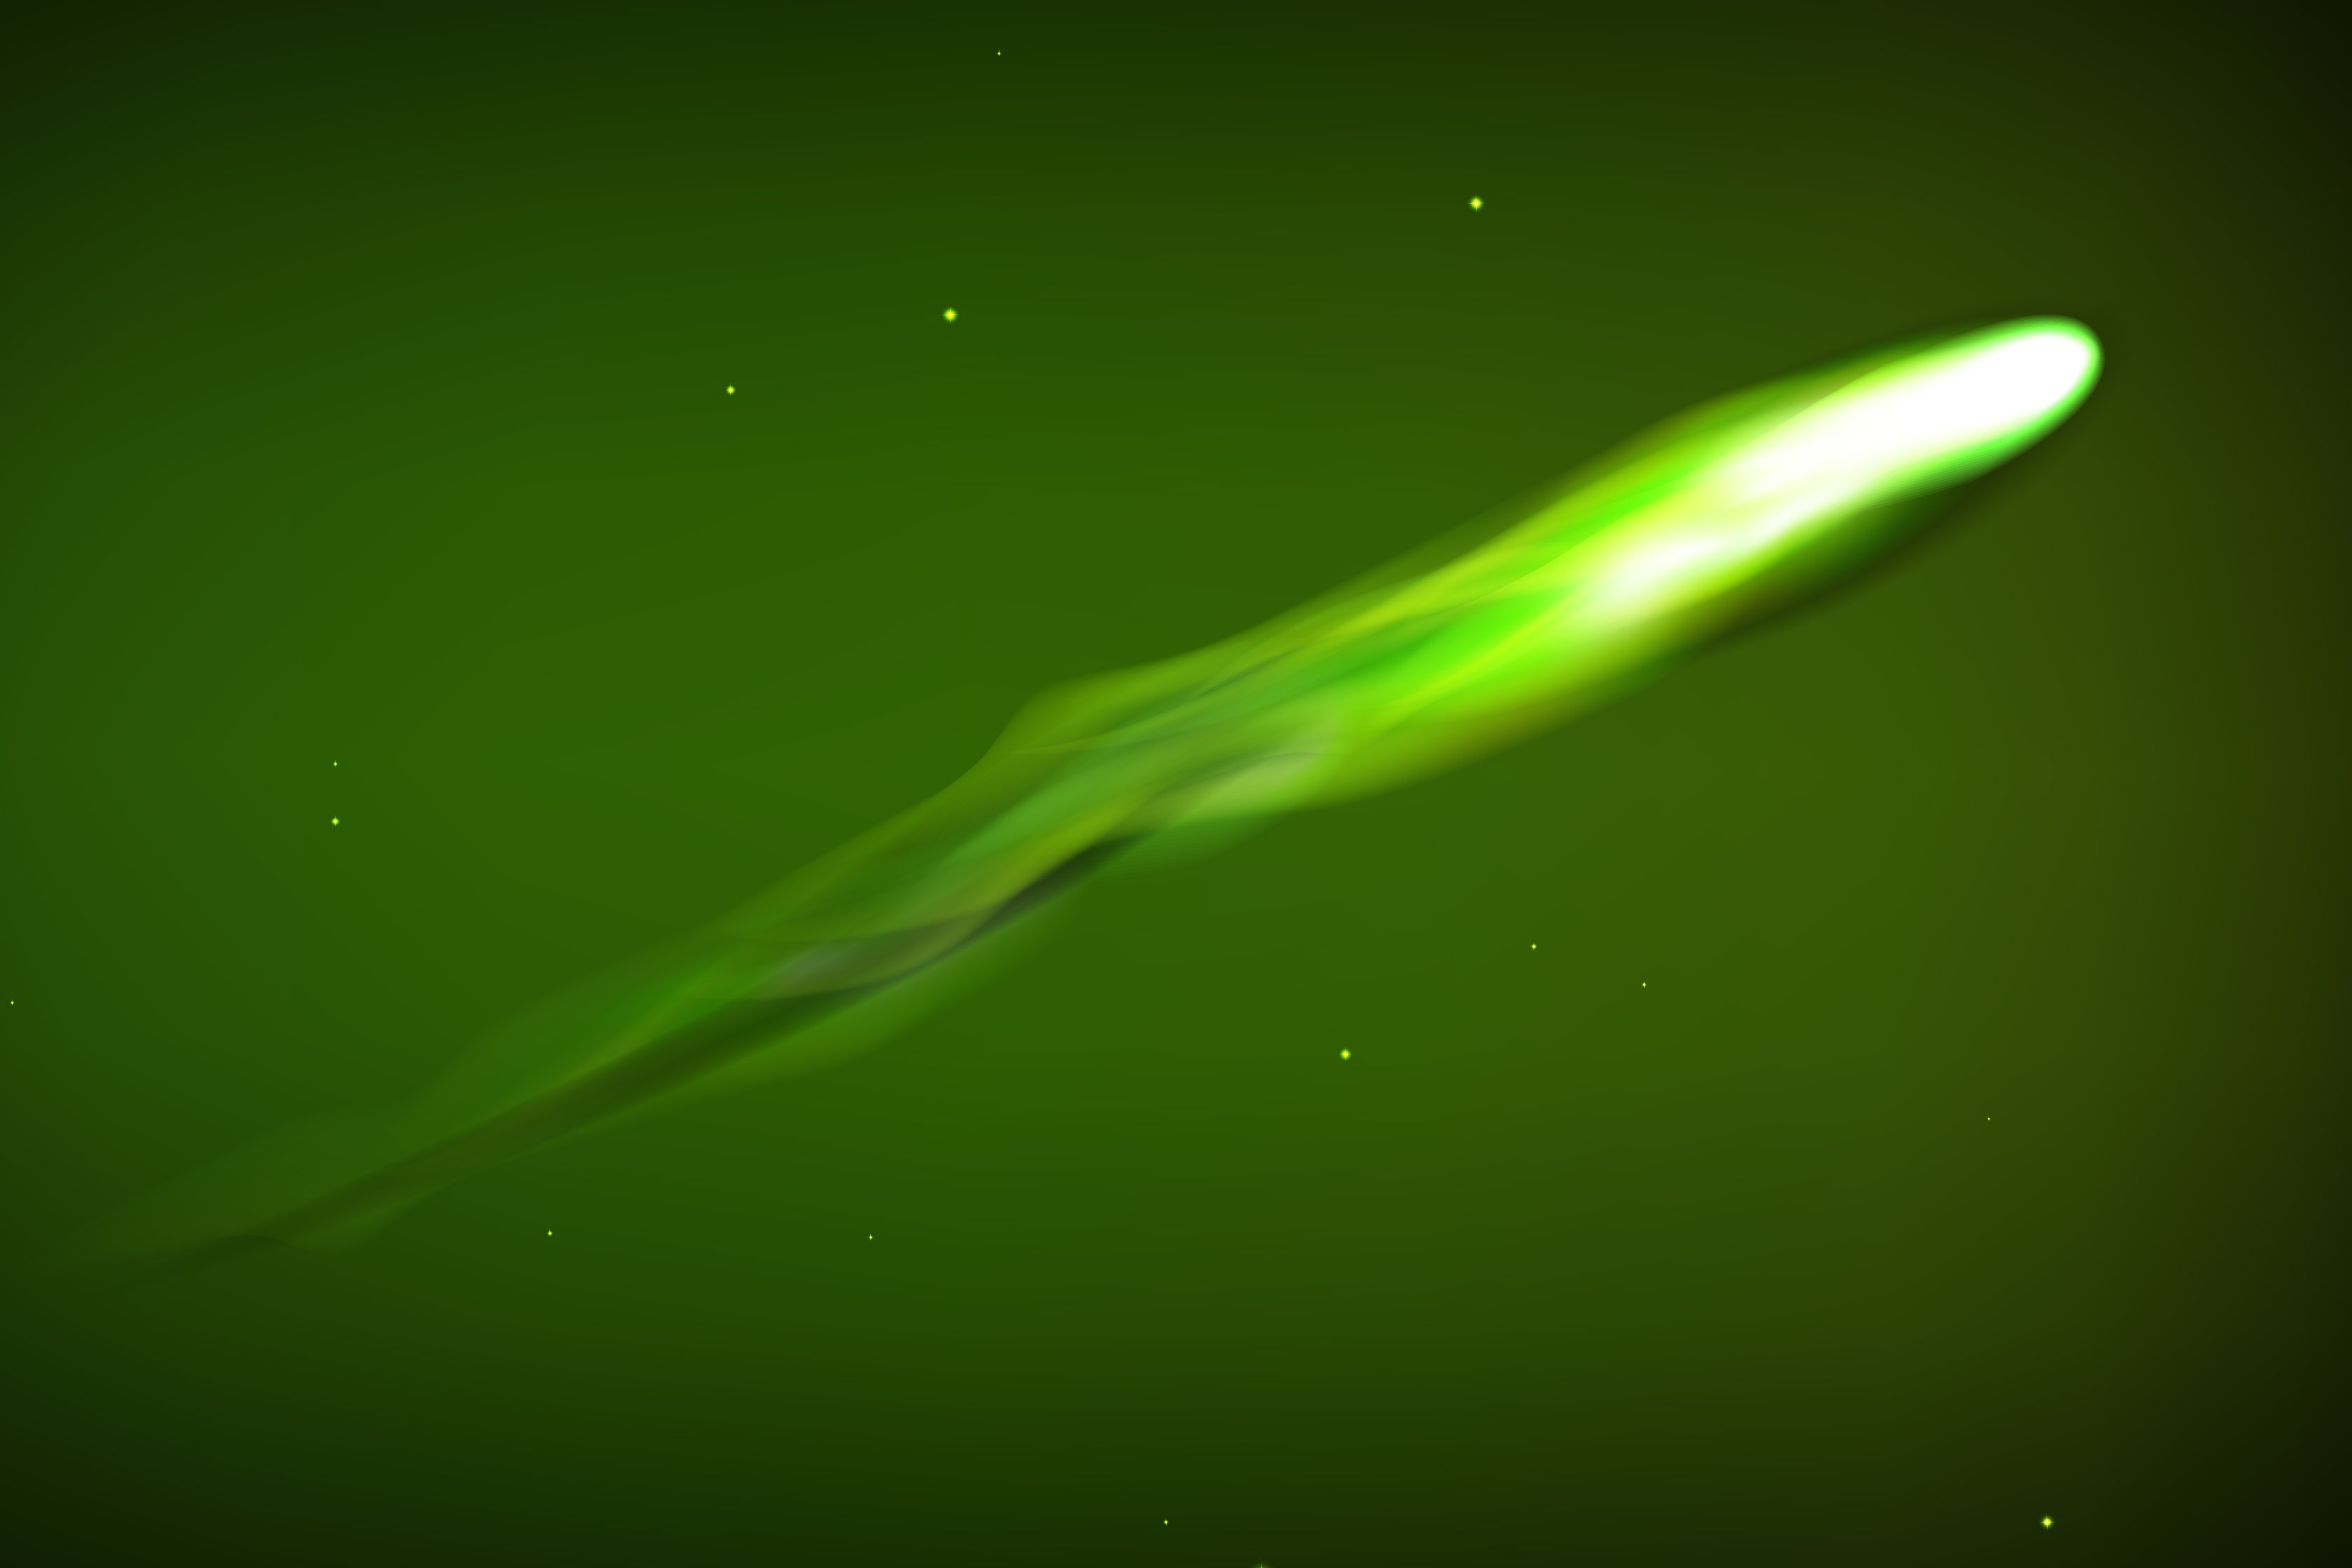 When, Where and How To See the Green Comet Right Now?